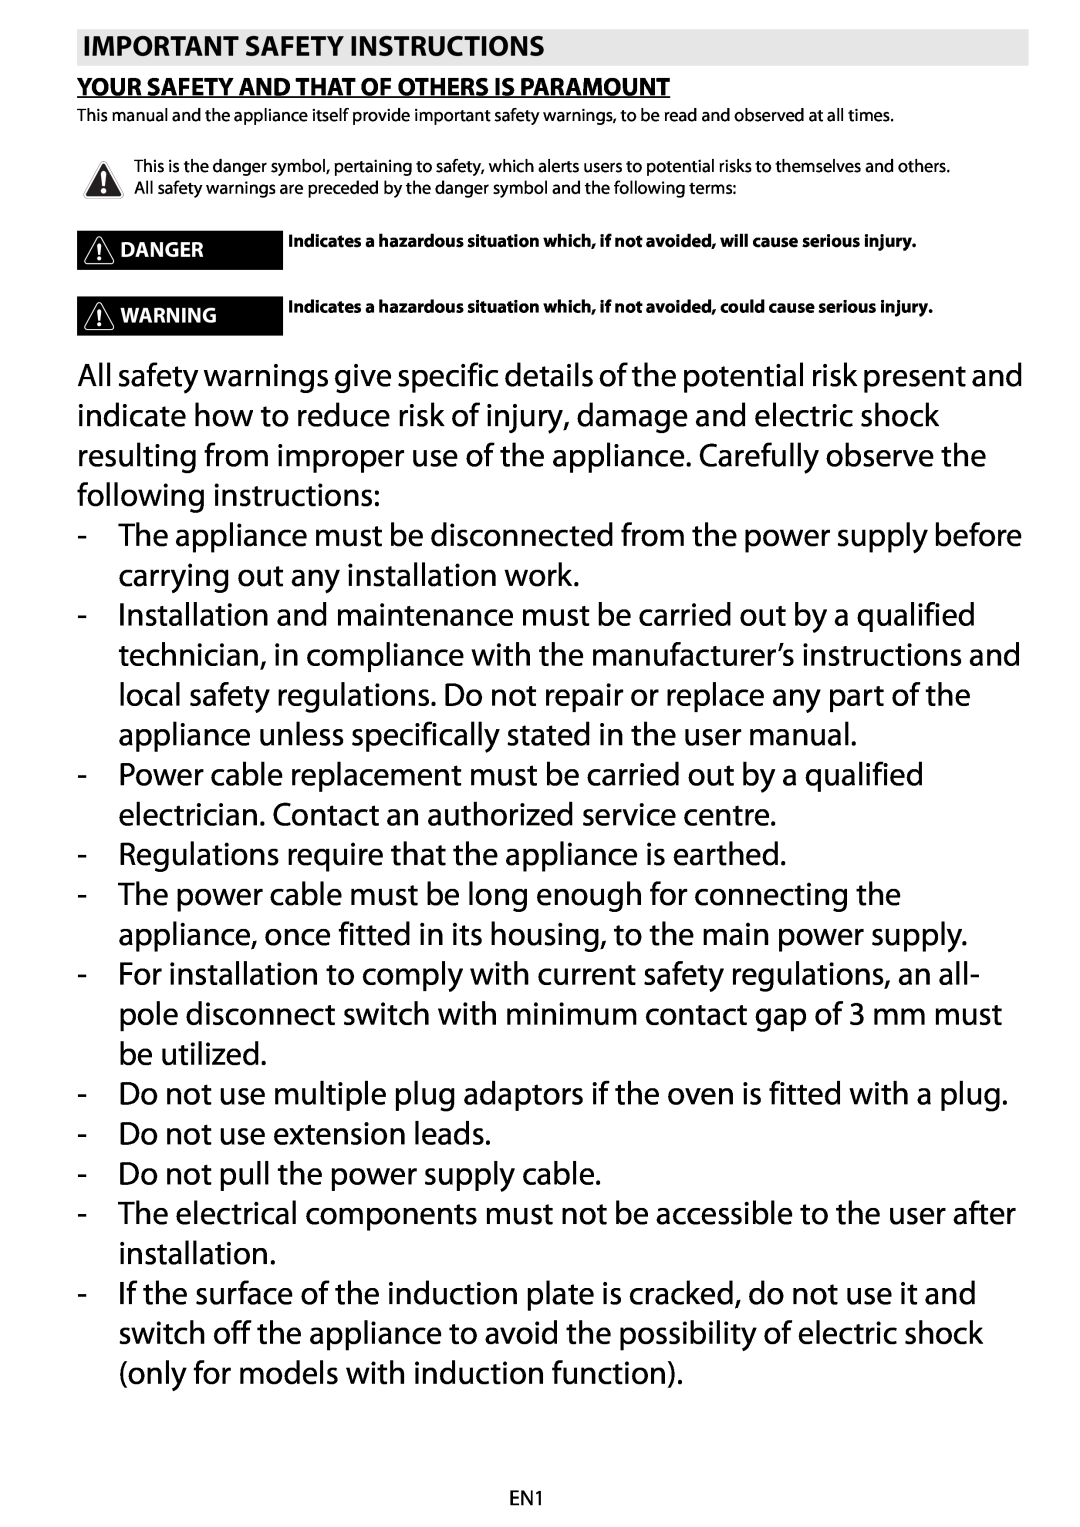 Whirlpool AKZM 6560 manual Regulations require that the appliance is earthed 